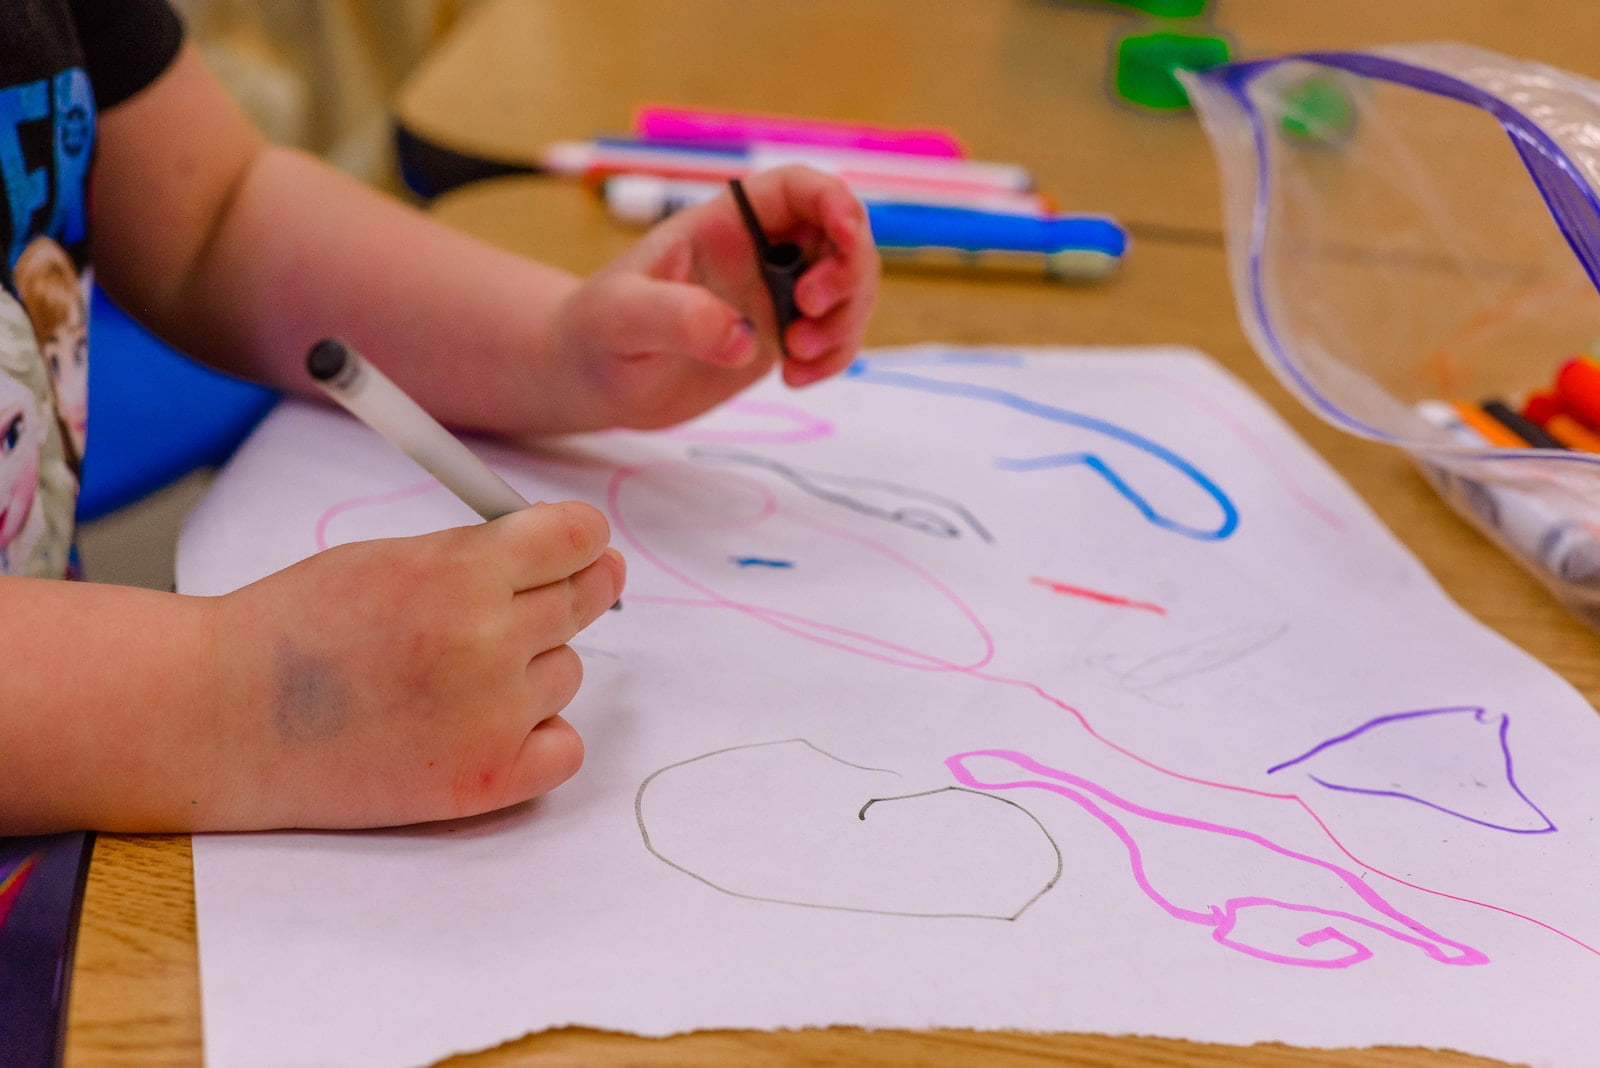 a child is drawing on a piece of paper